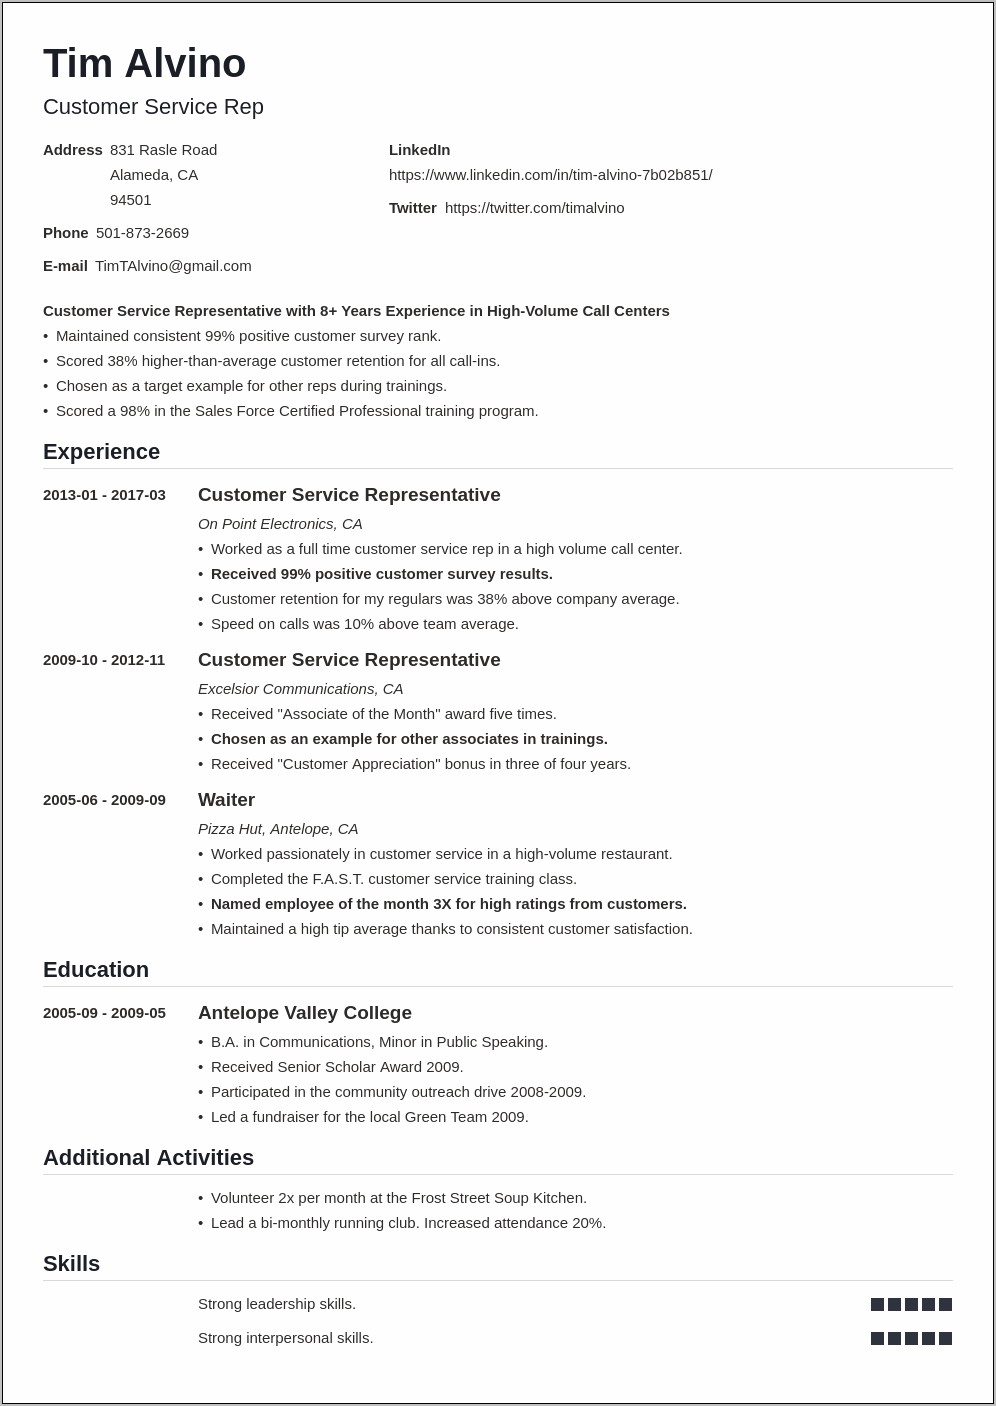 Resume Title For Job Seekers